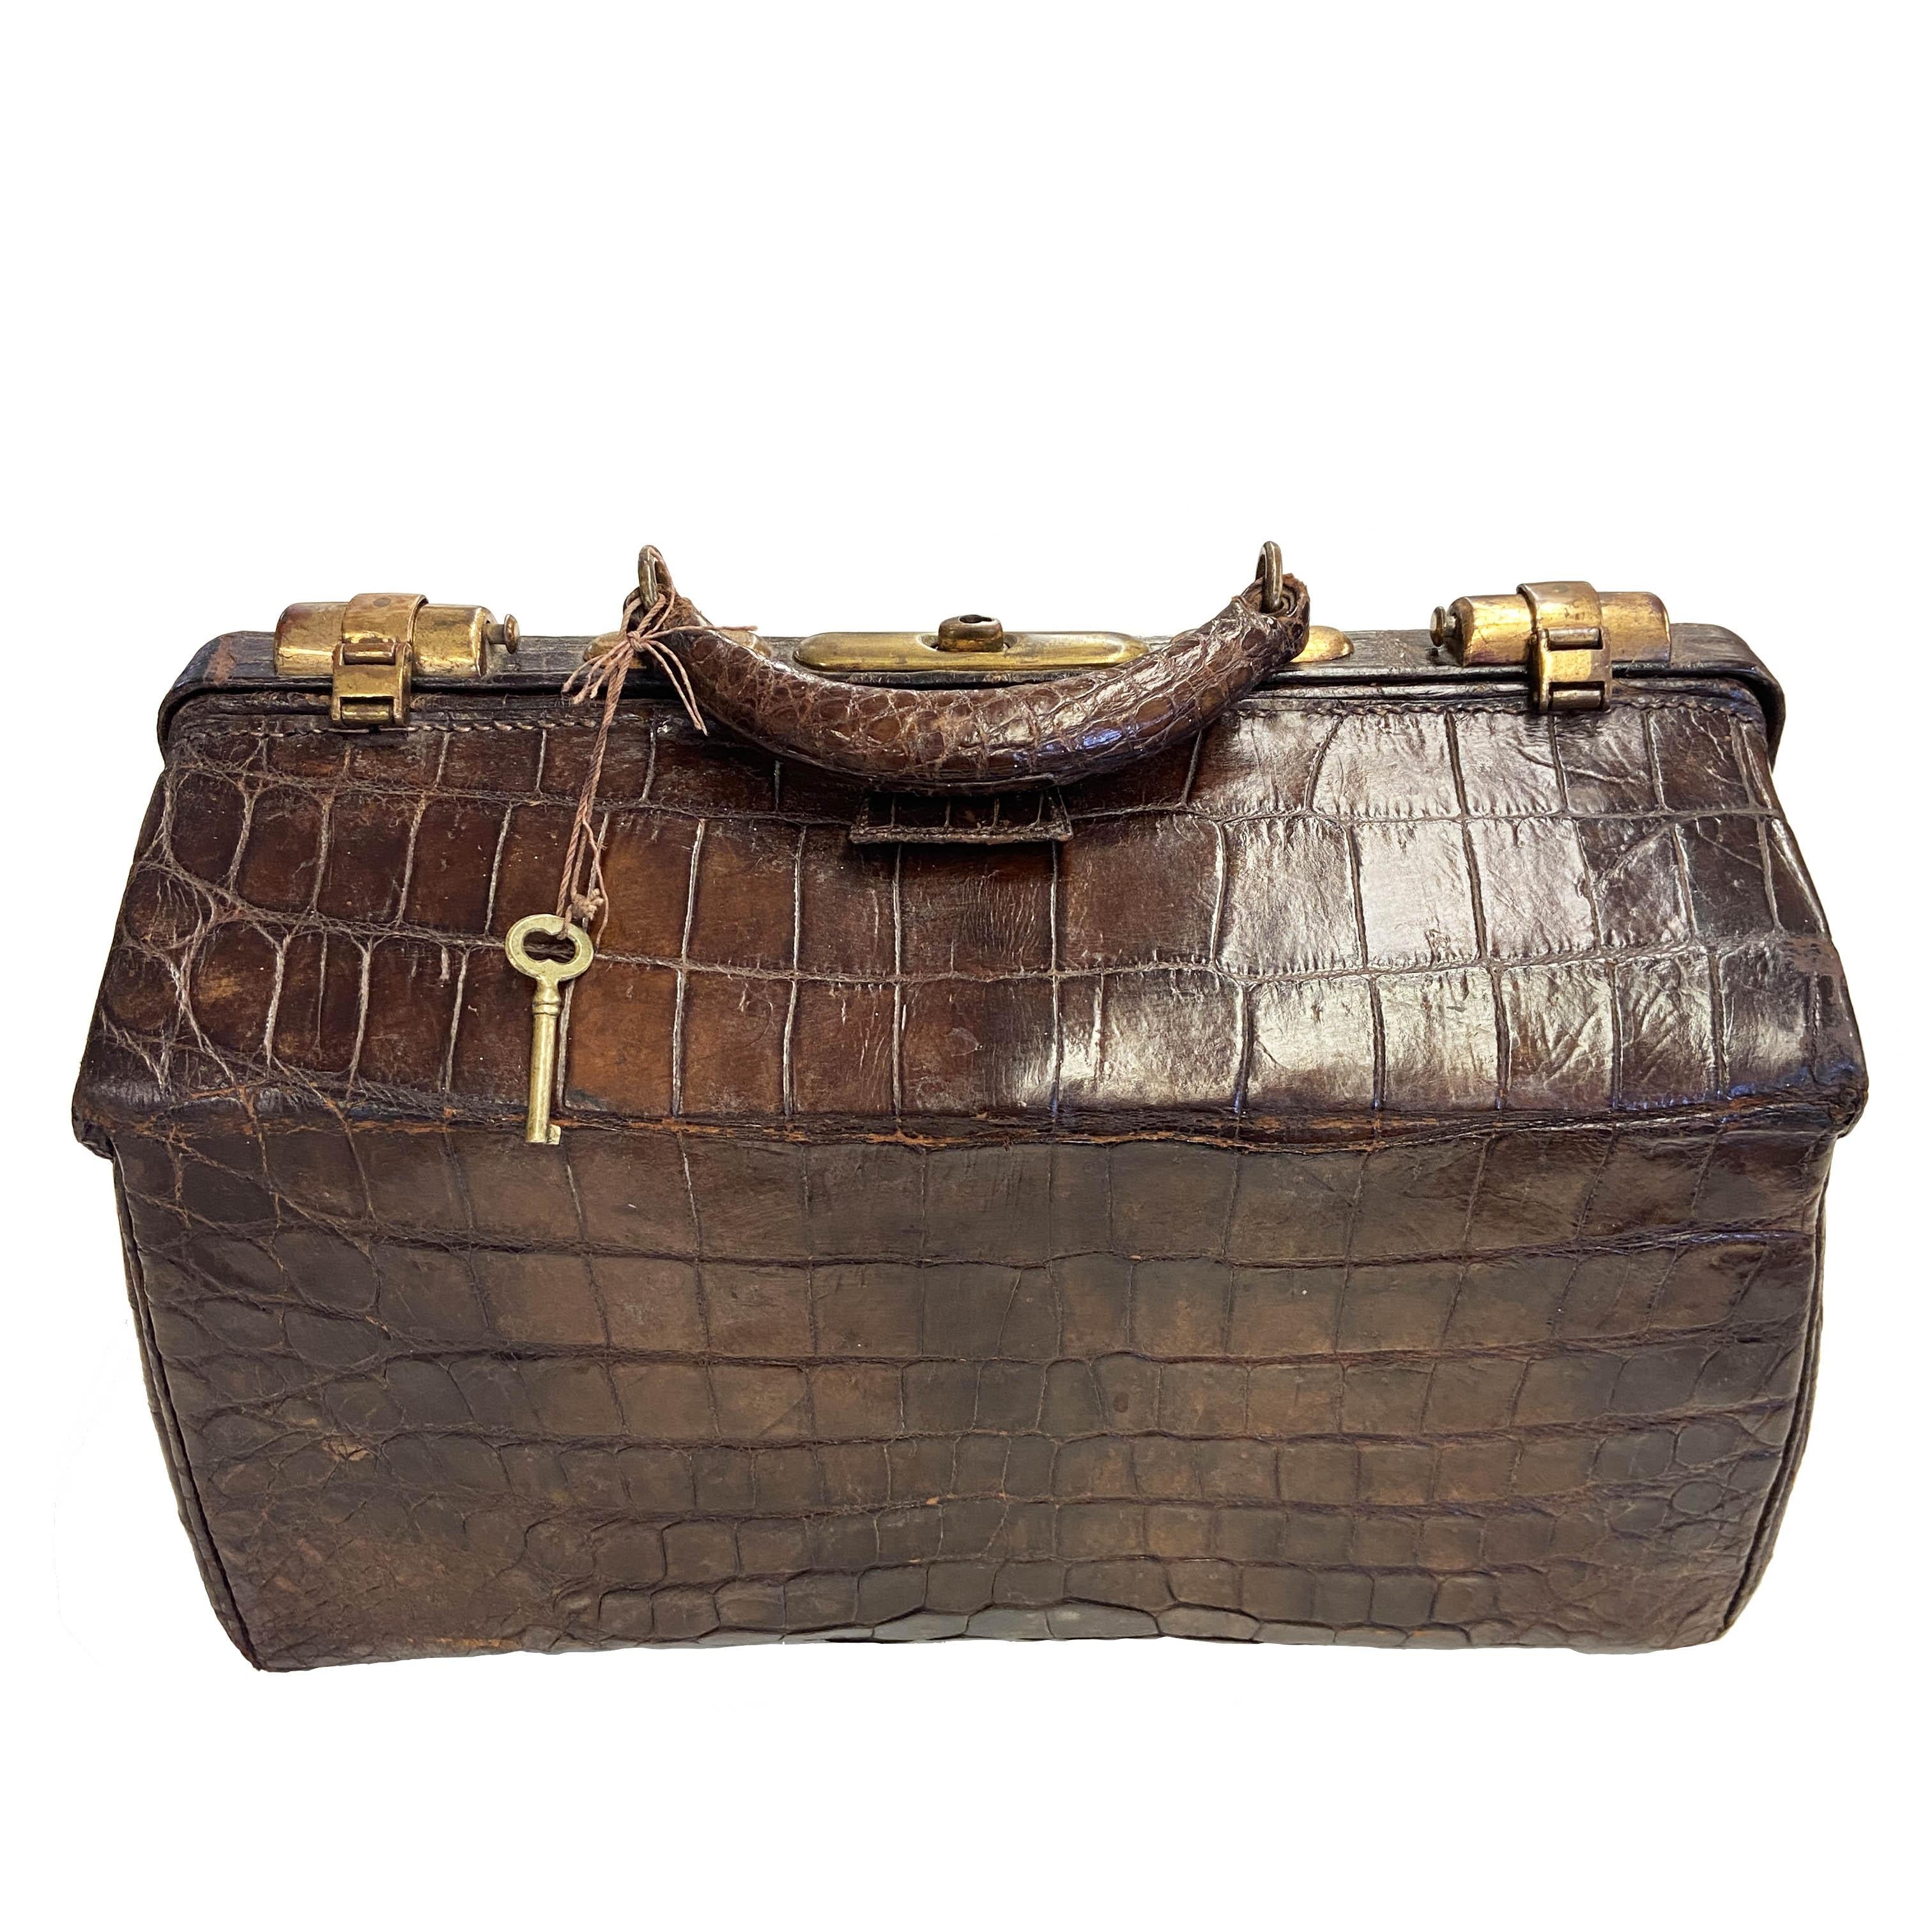 This magnificent and rare antique 19th century Victorian Doctor's Satchel from the John Wanamaker Department Store is made of genuine alligator skin and in superb condition. The original hardware latches and closes nicely, with working key attached.